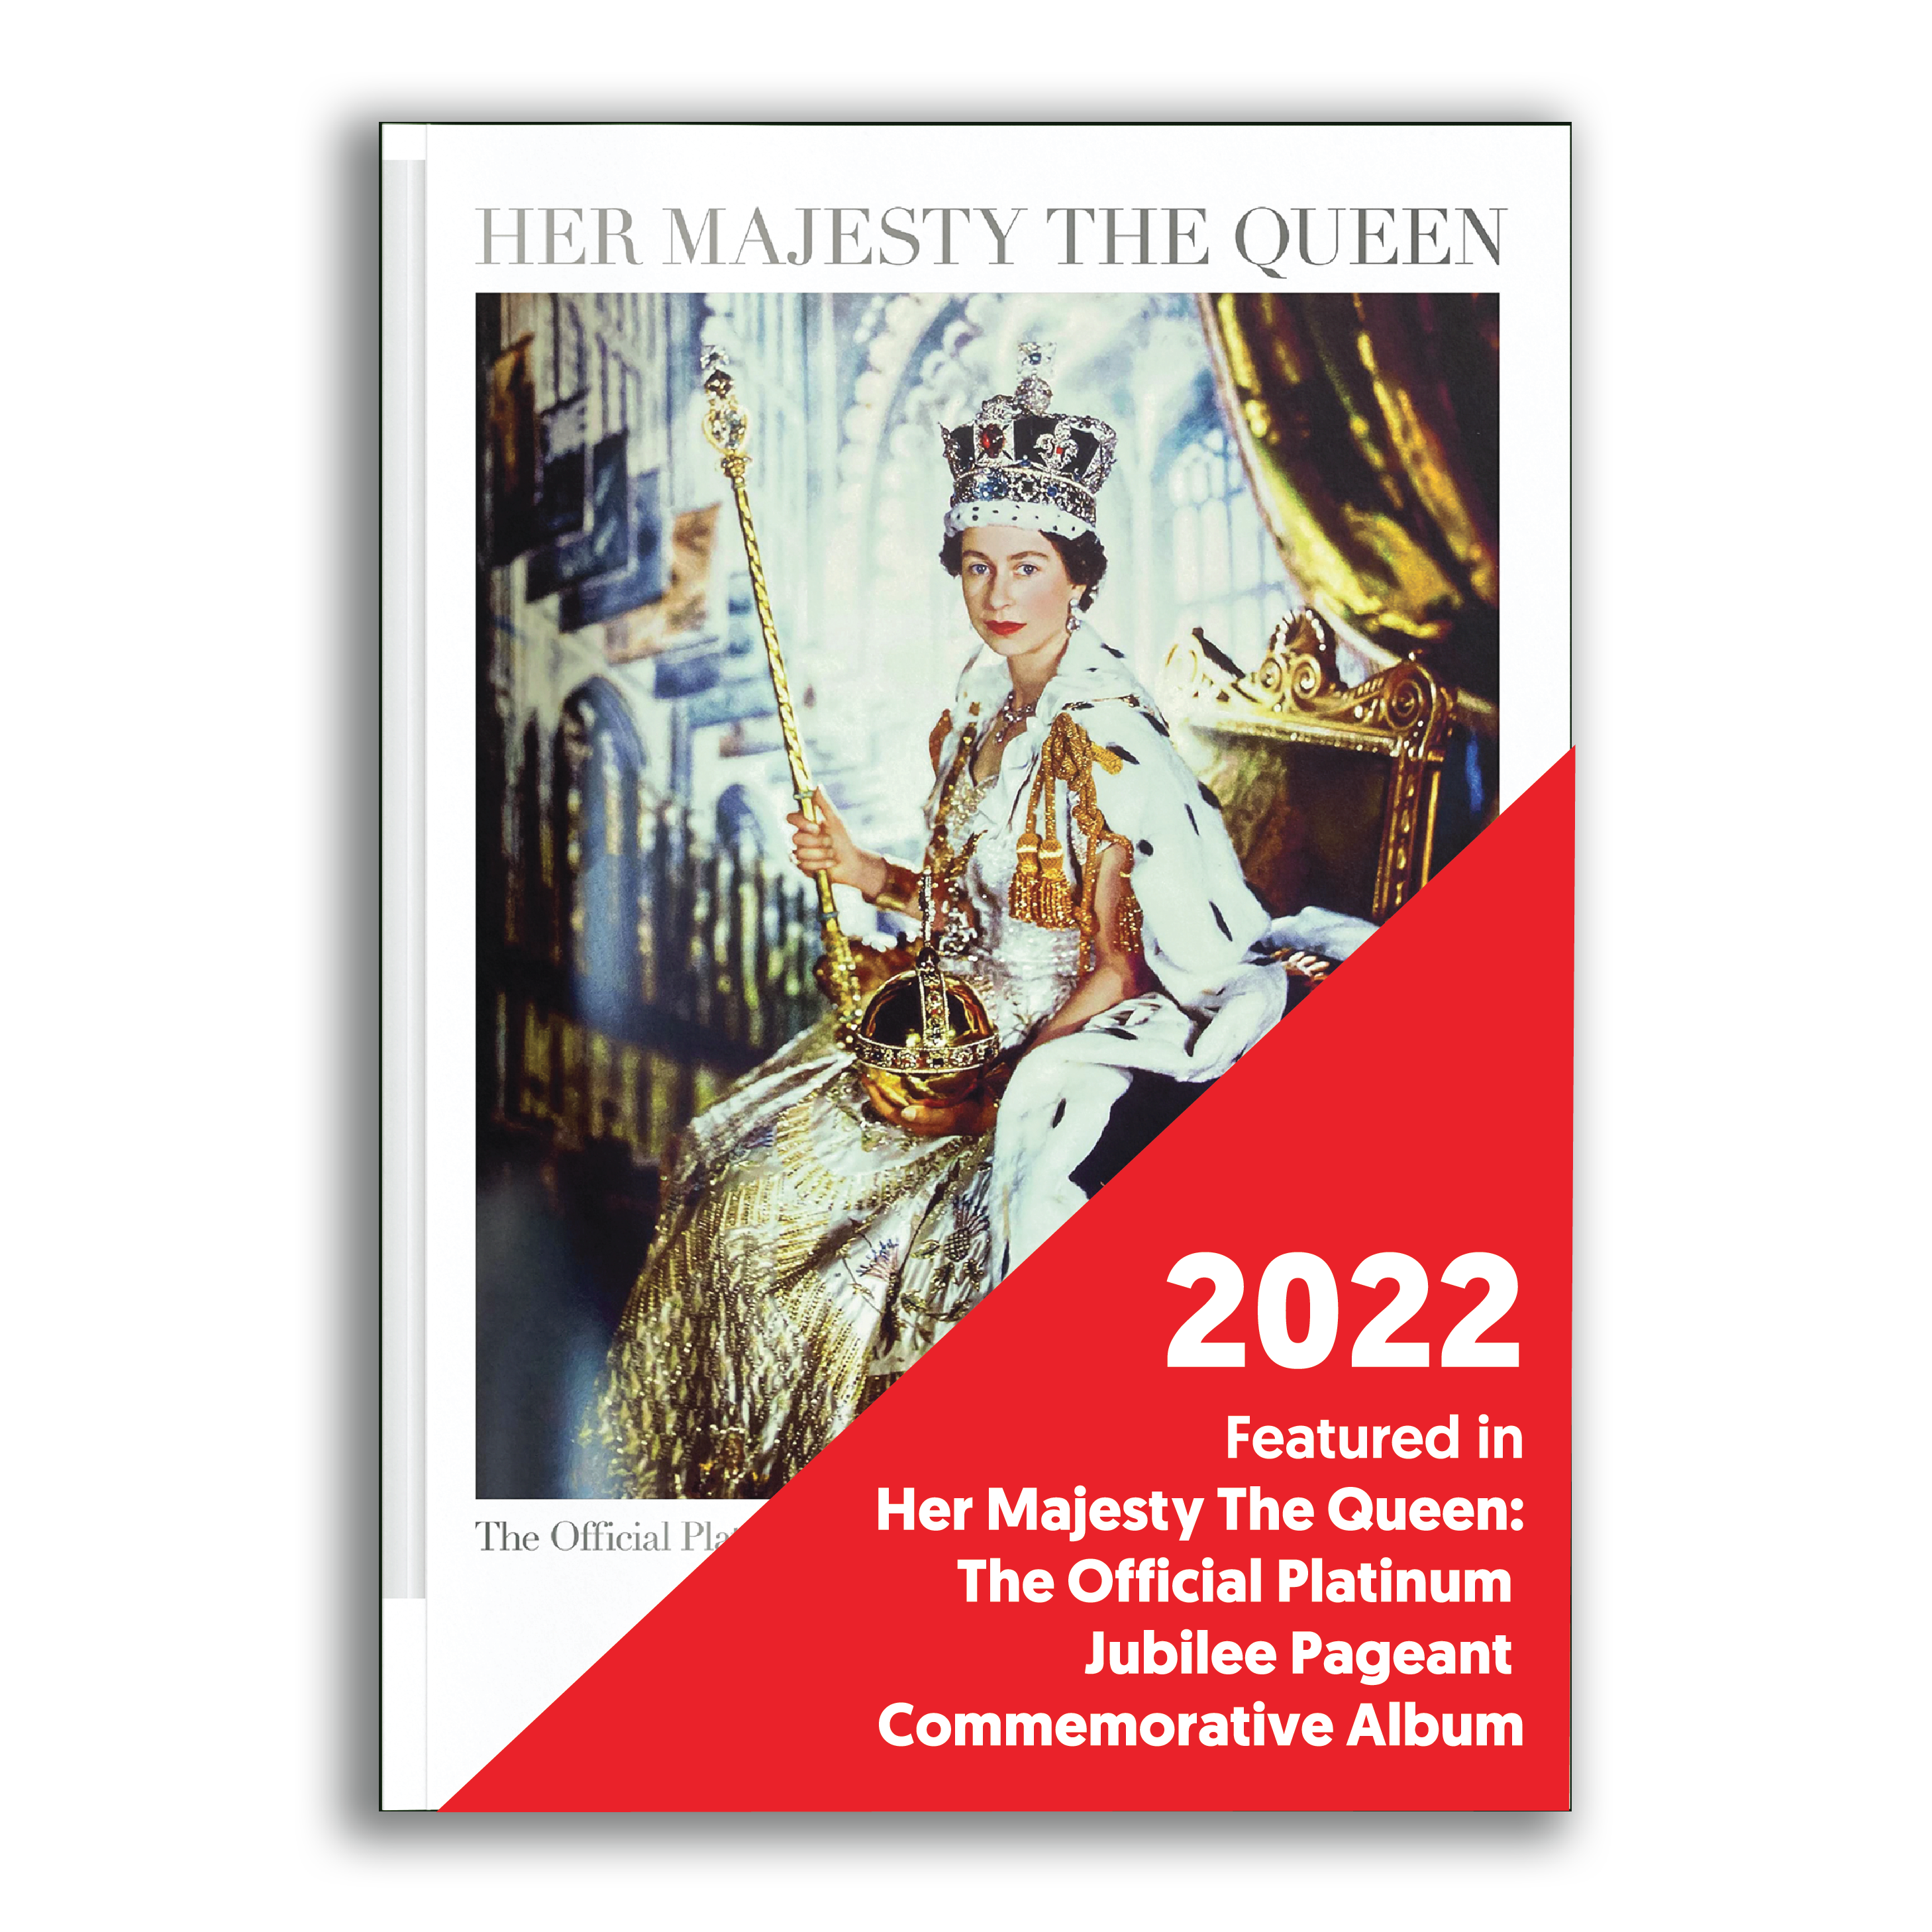 ACE EdVenture featured in her Majesty The Queen: The Official Platinum Jubilee Pageant Commemorative Album.